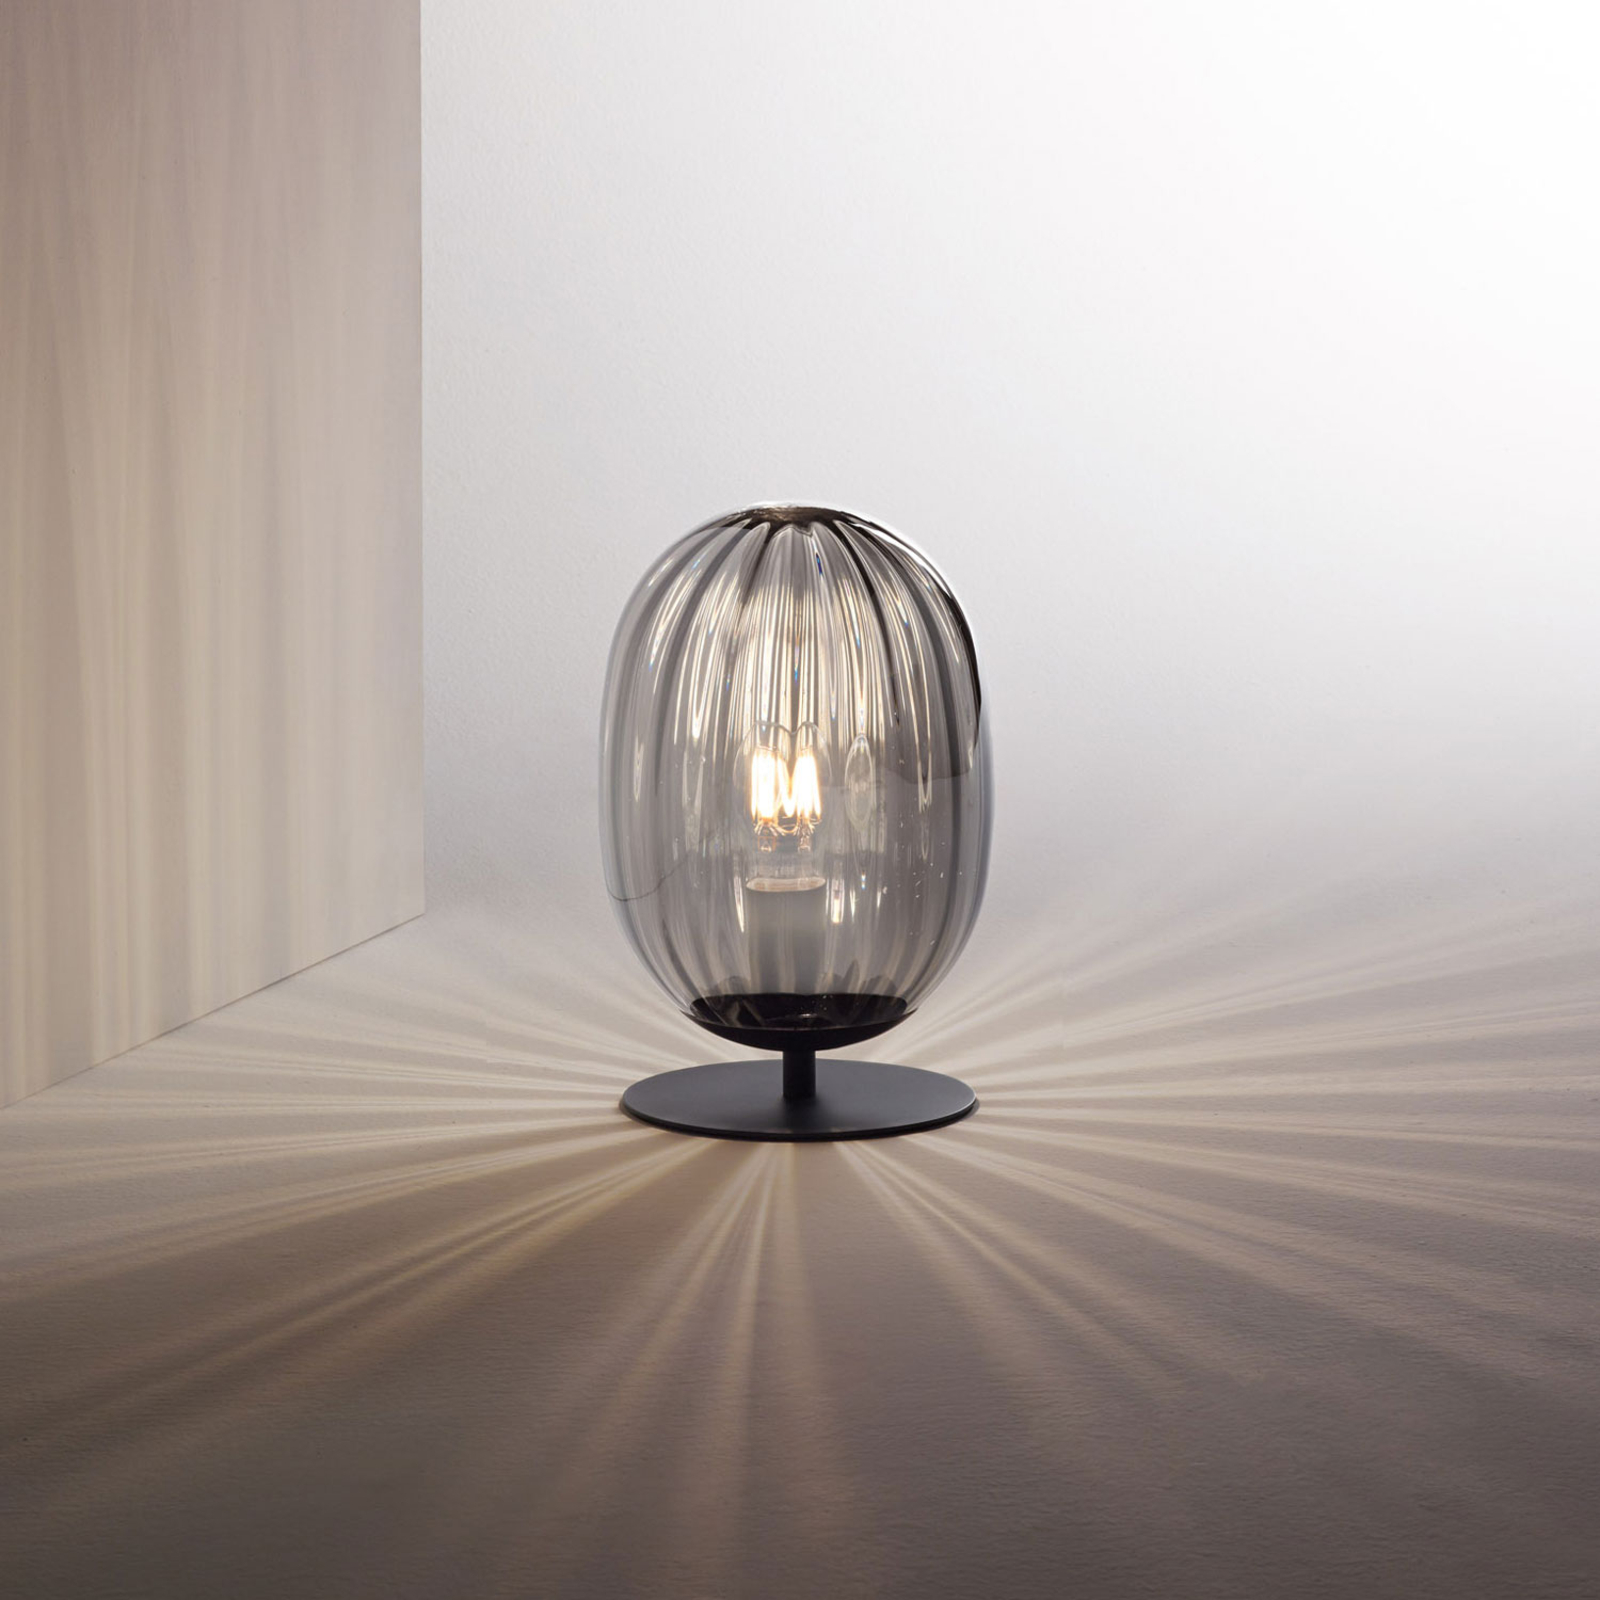 Infinity table lamp with a curved glass lampshade